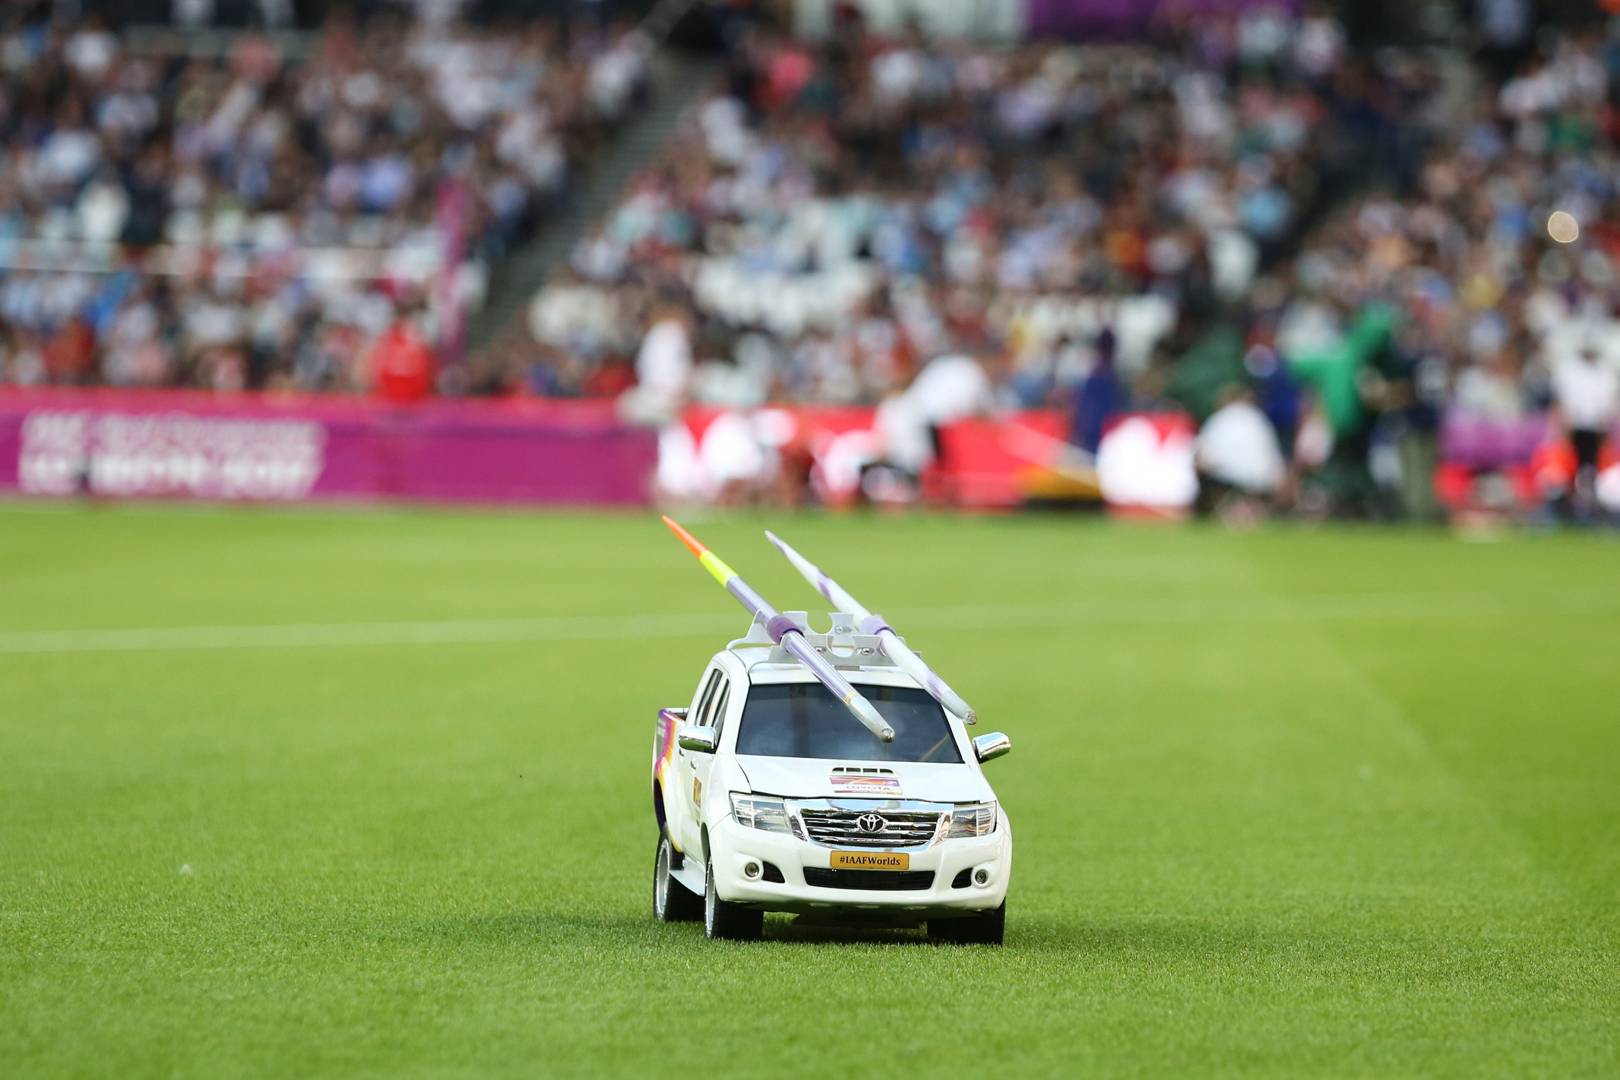 How do you fetch a javelin? With a tiny car, of course